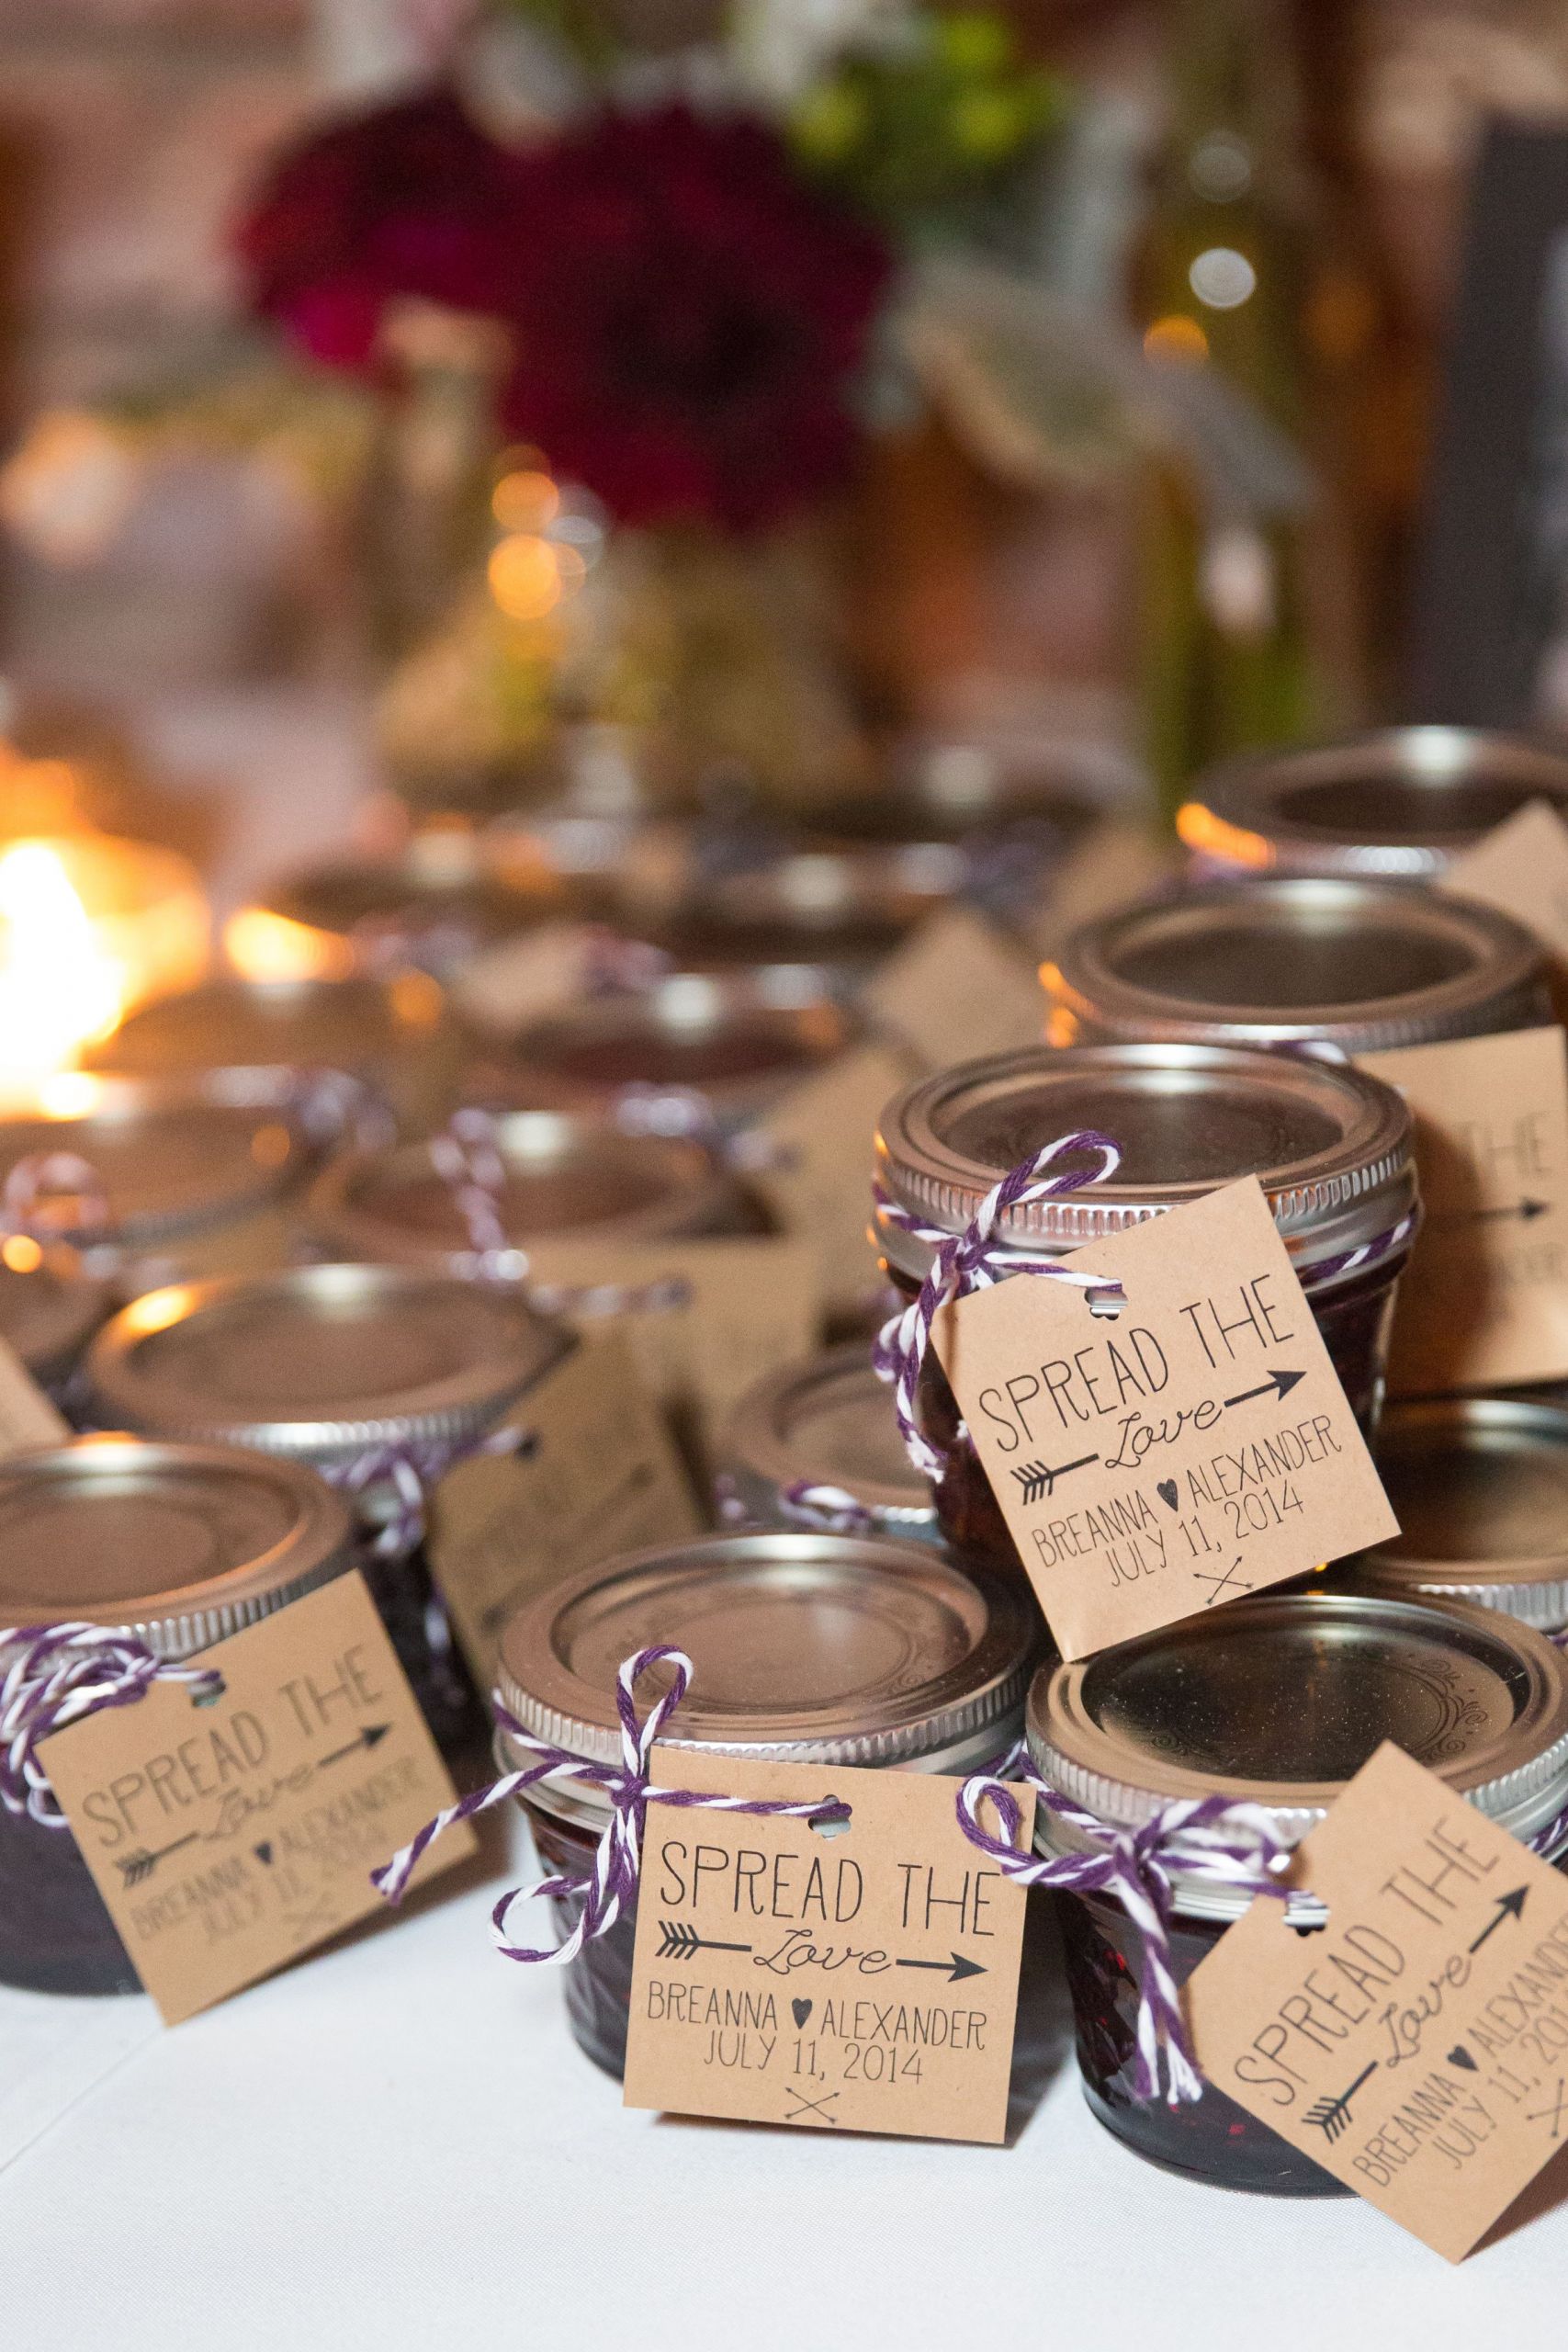 Wedding Guest Favors
 Homemade triple berry jam was given to guests to take home